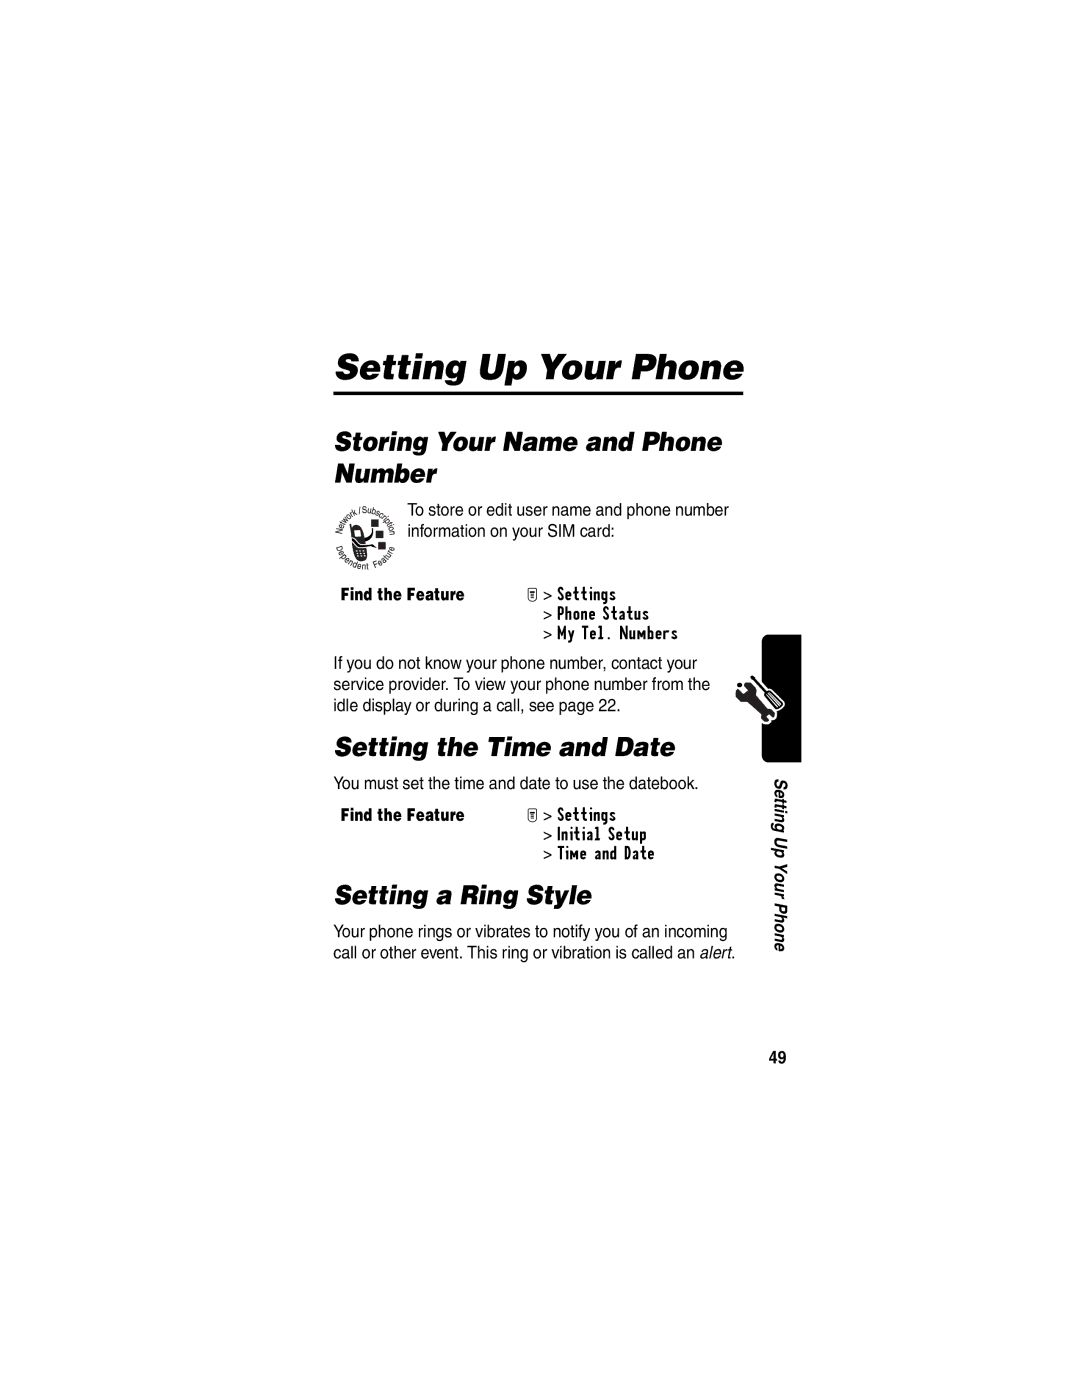 Motorola T722i manual Storing Your Name and Phone Number, Setting the Time and Date, Setting a Ring Style 